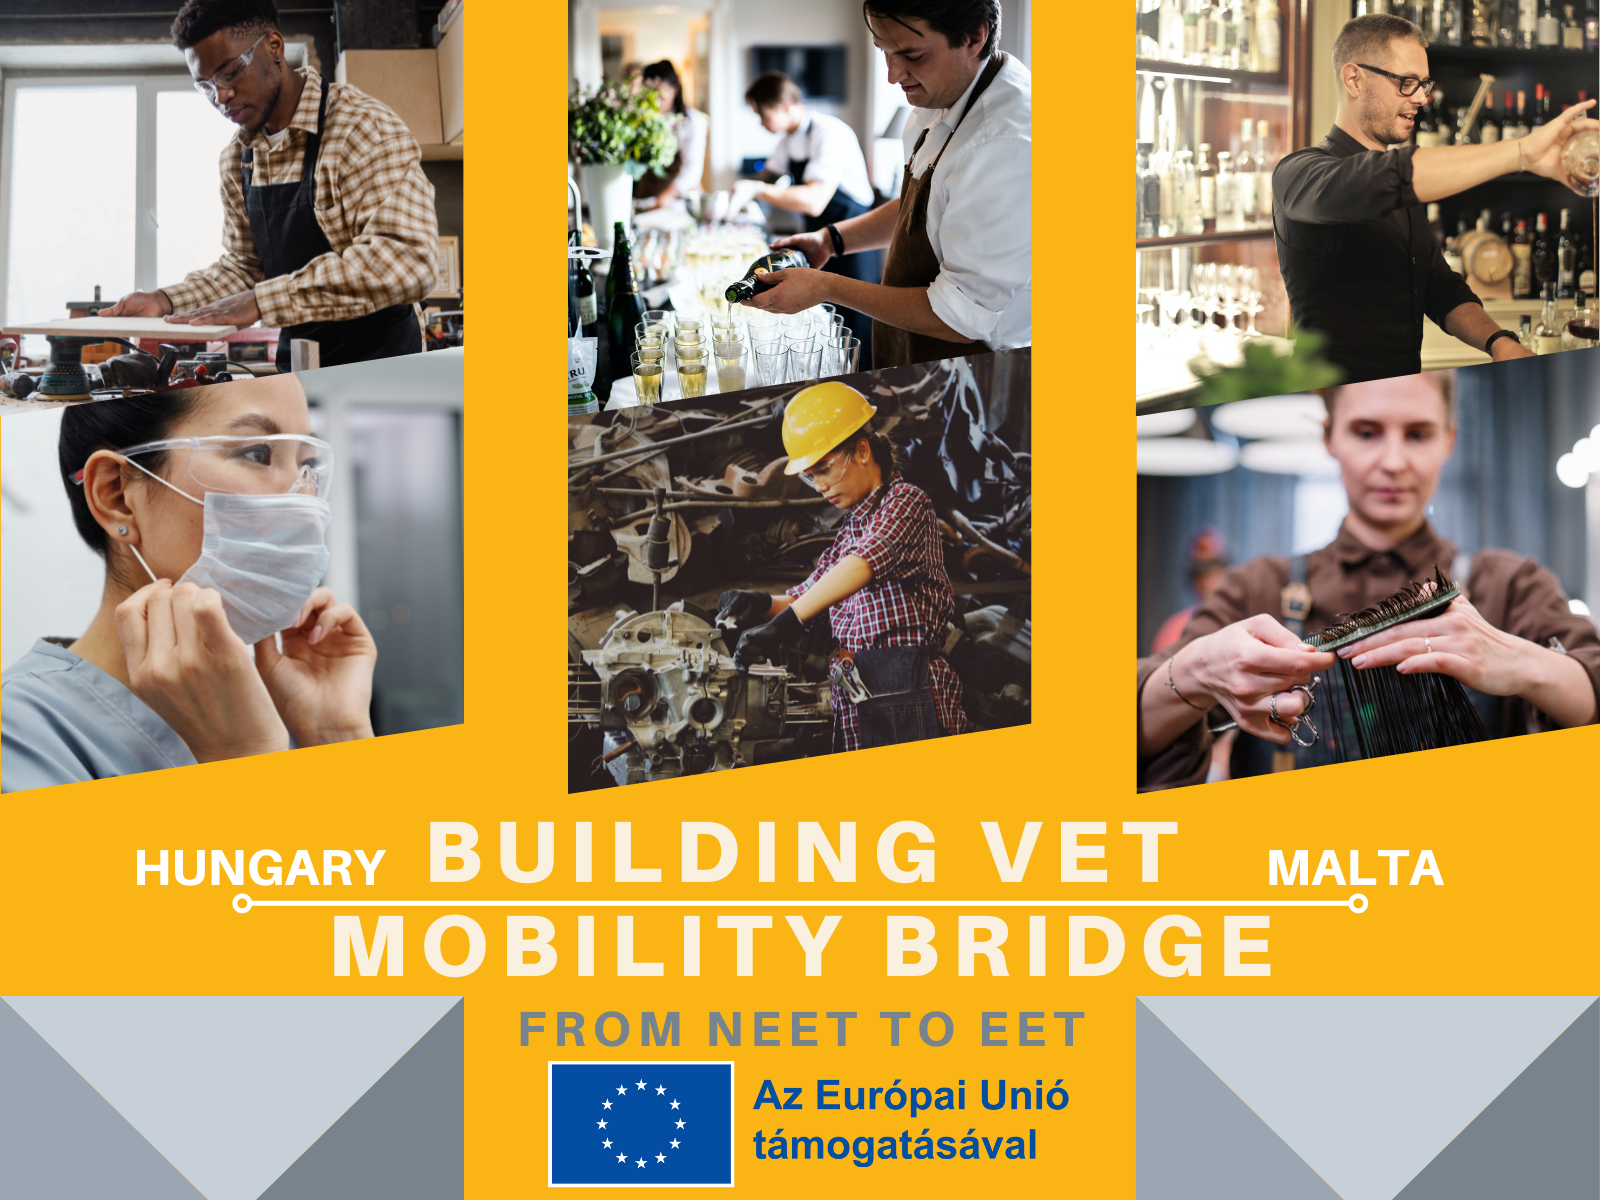 Building a VET mobility learning bridge between Hungary and Malta - From NEET to EET